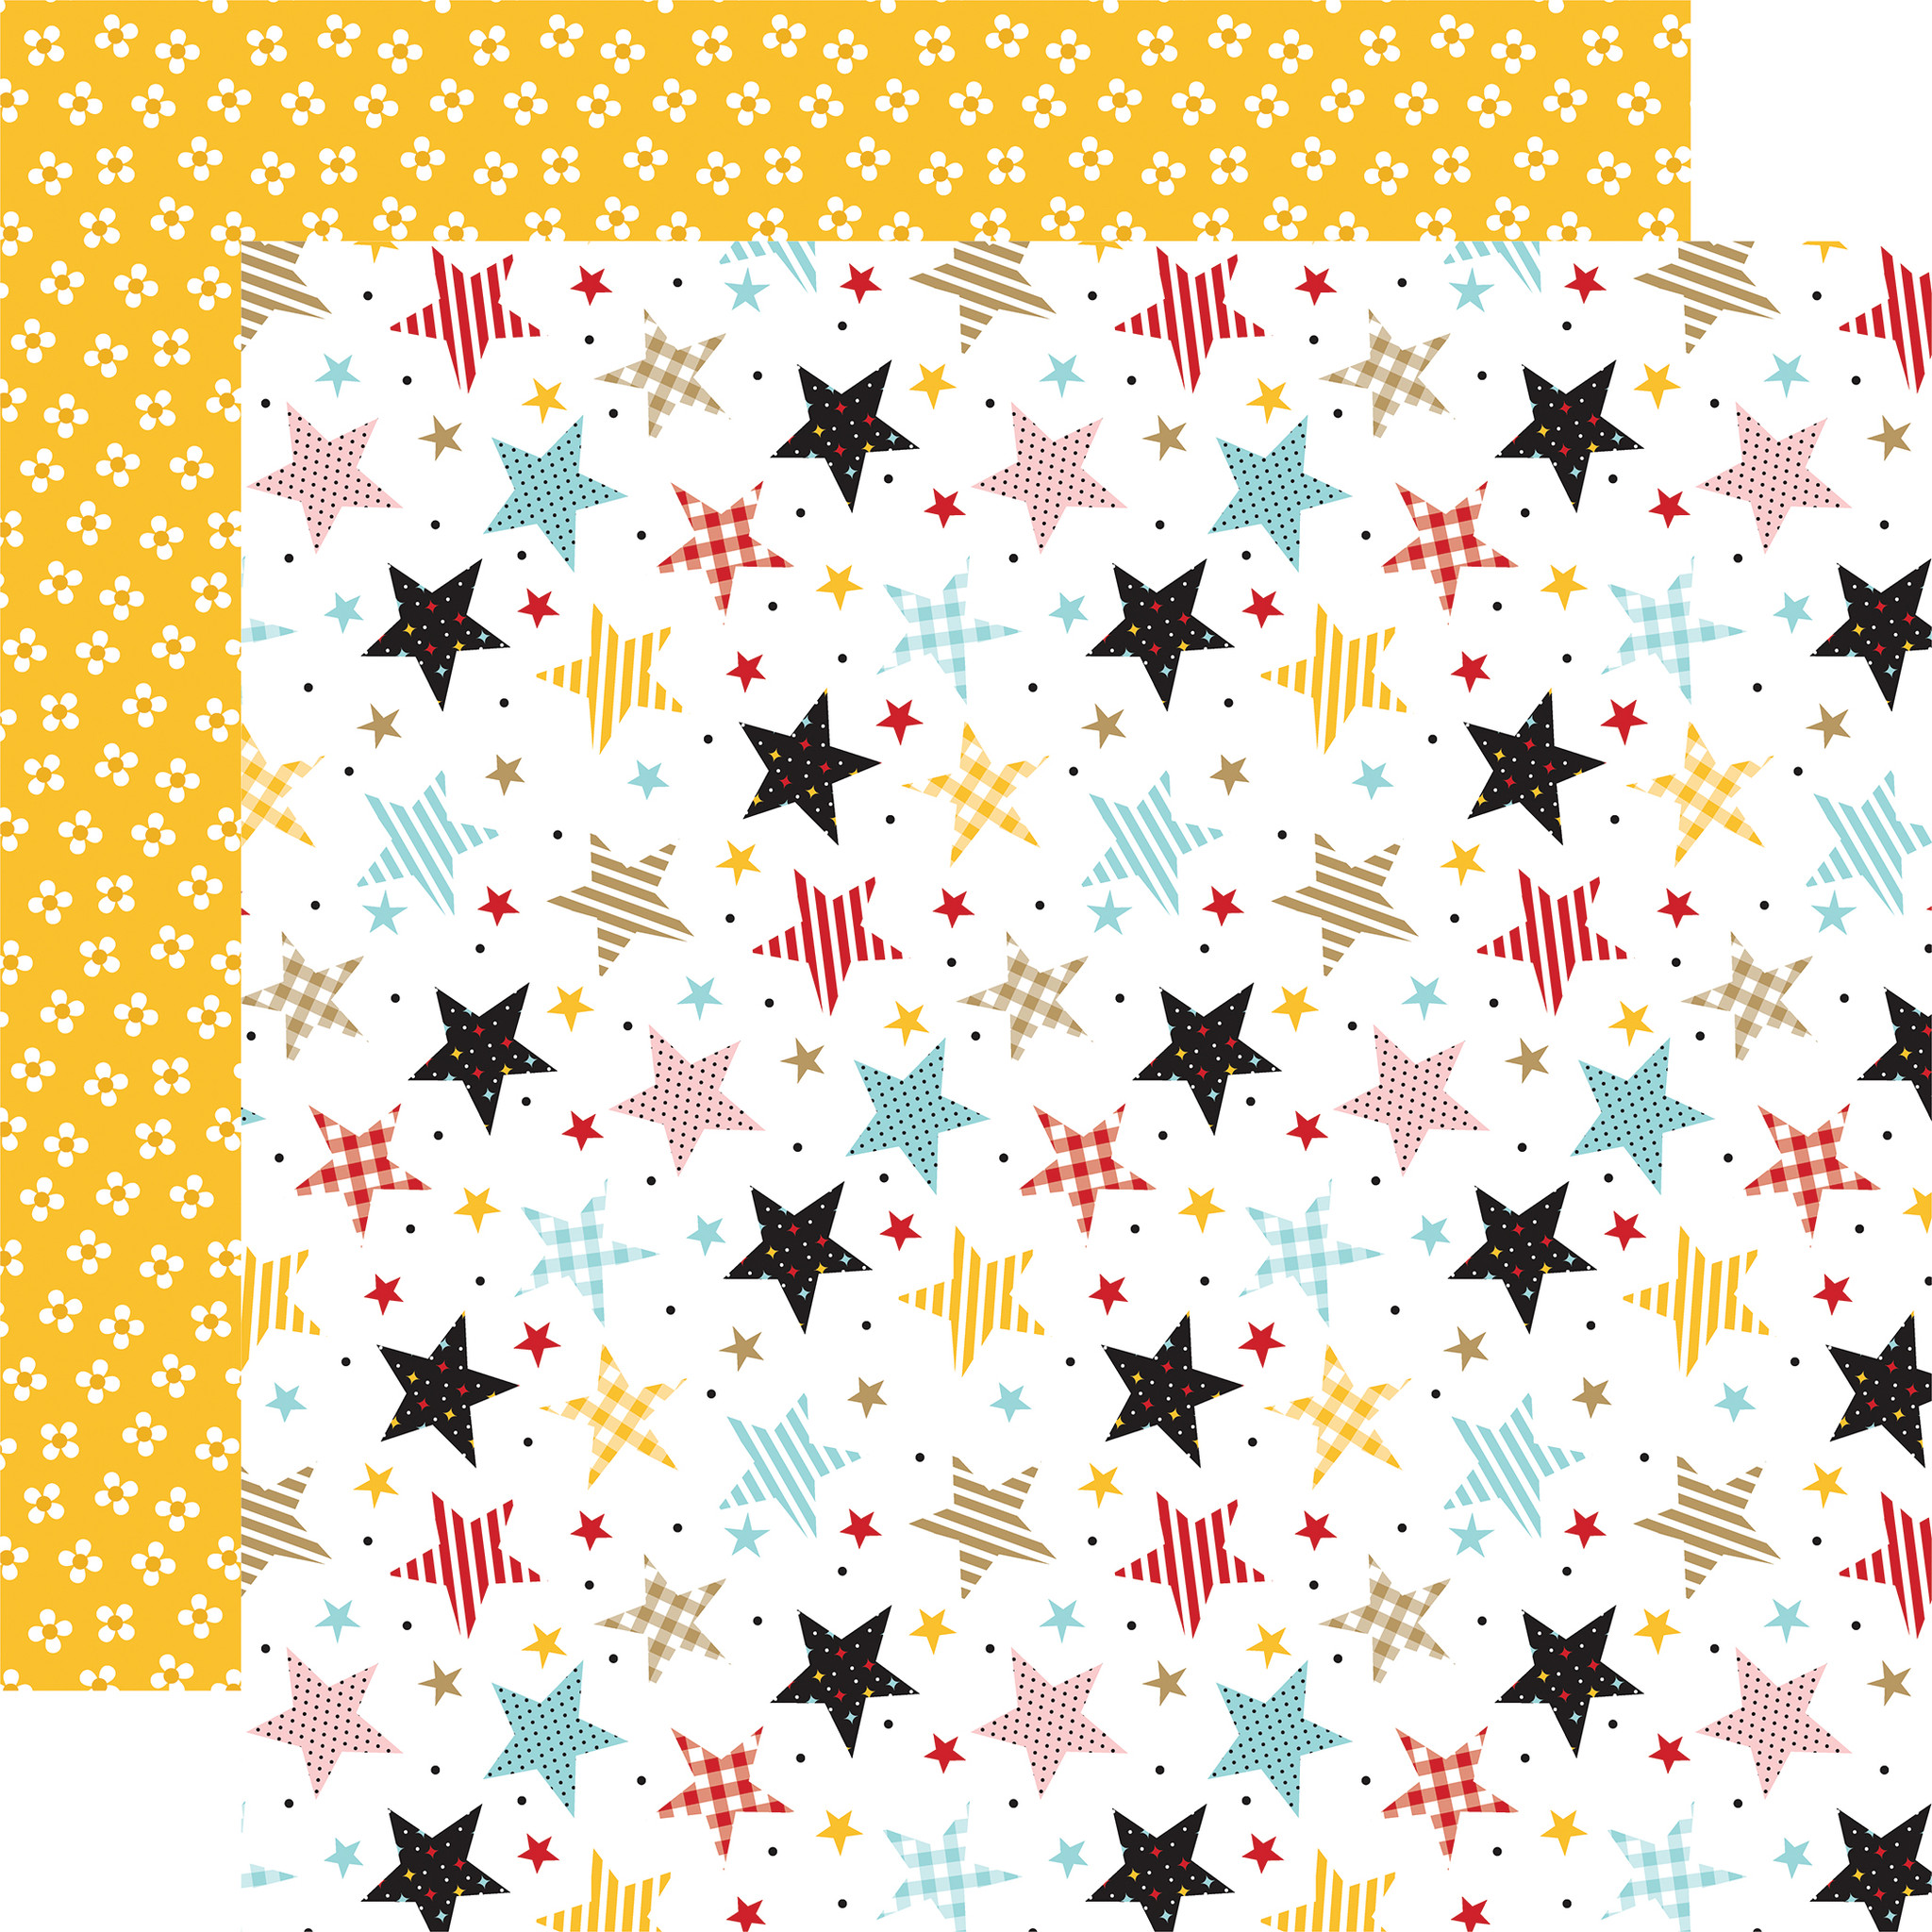 Patterned Paper